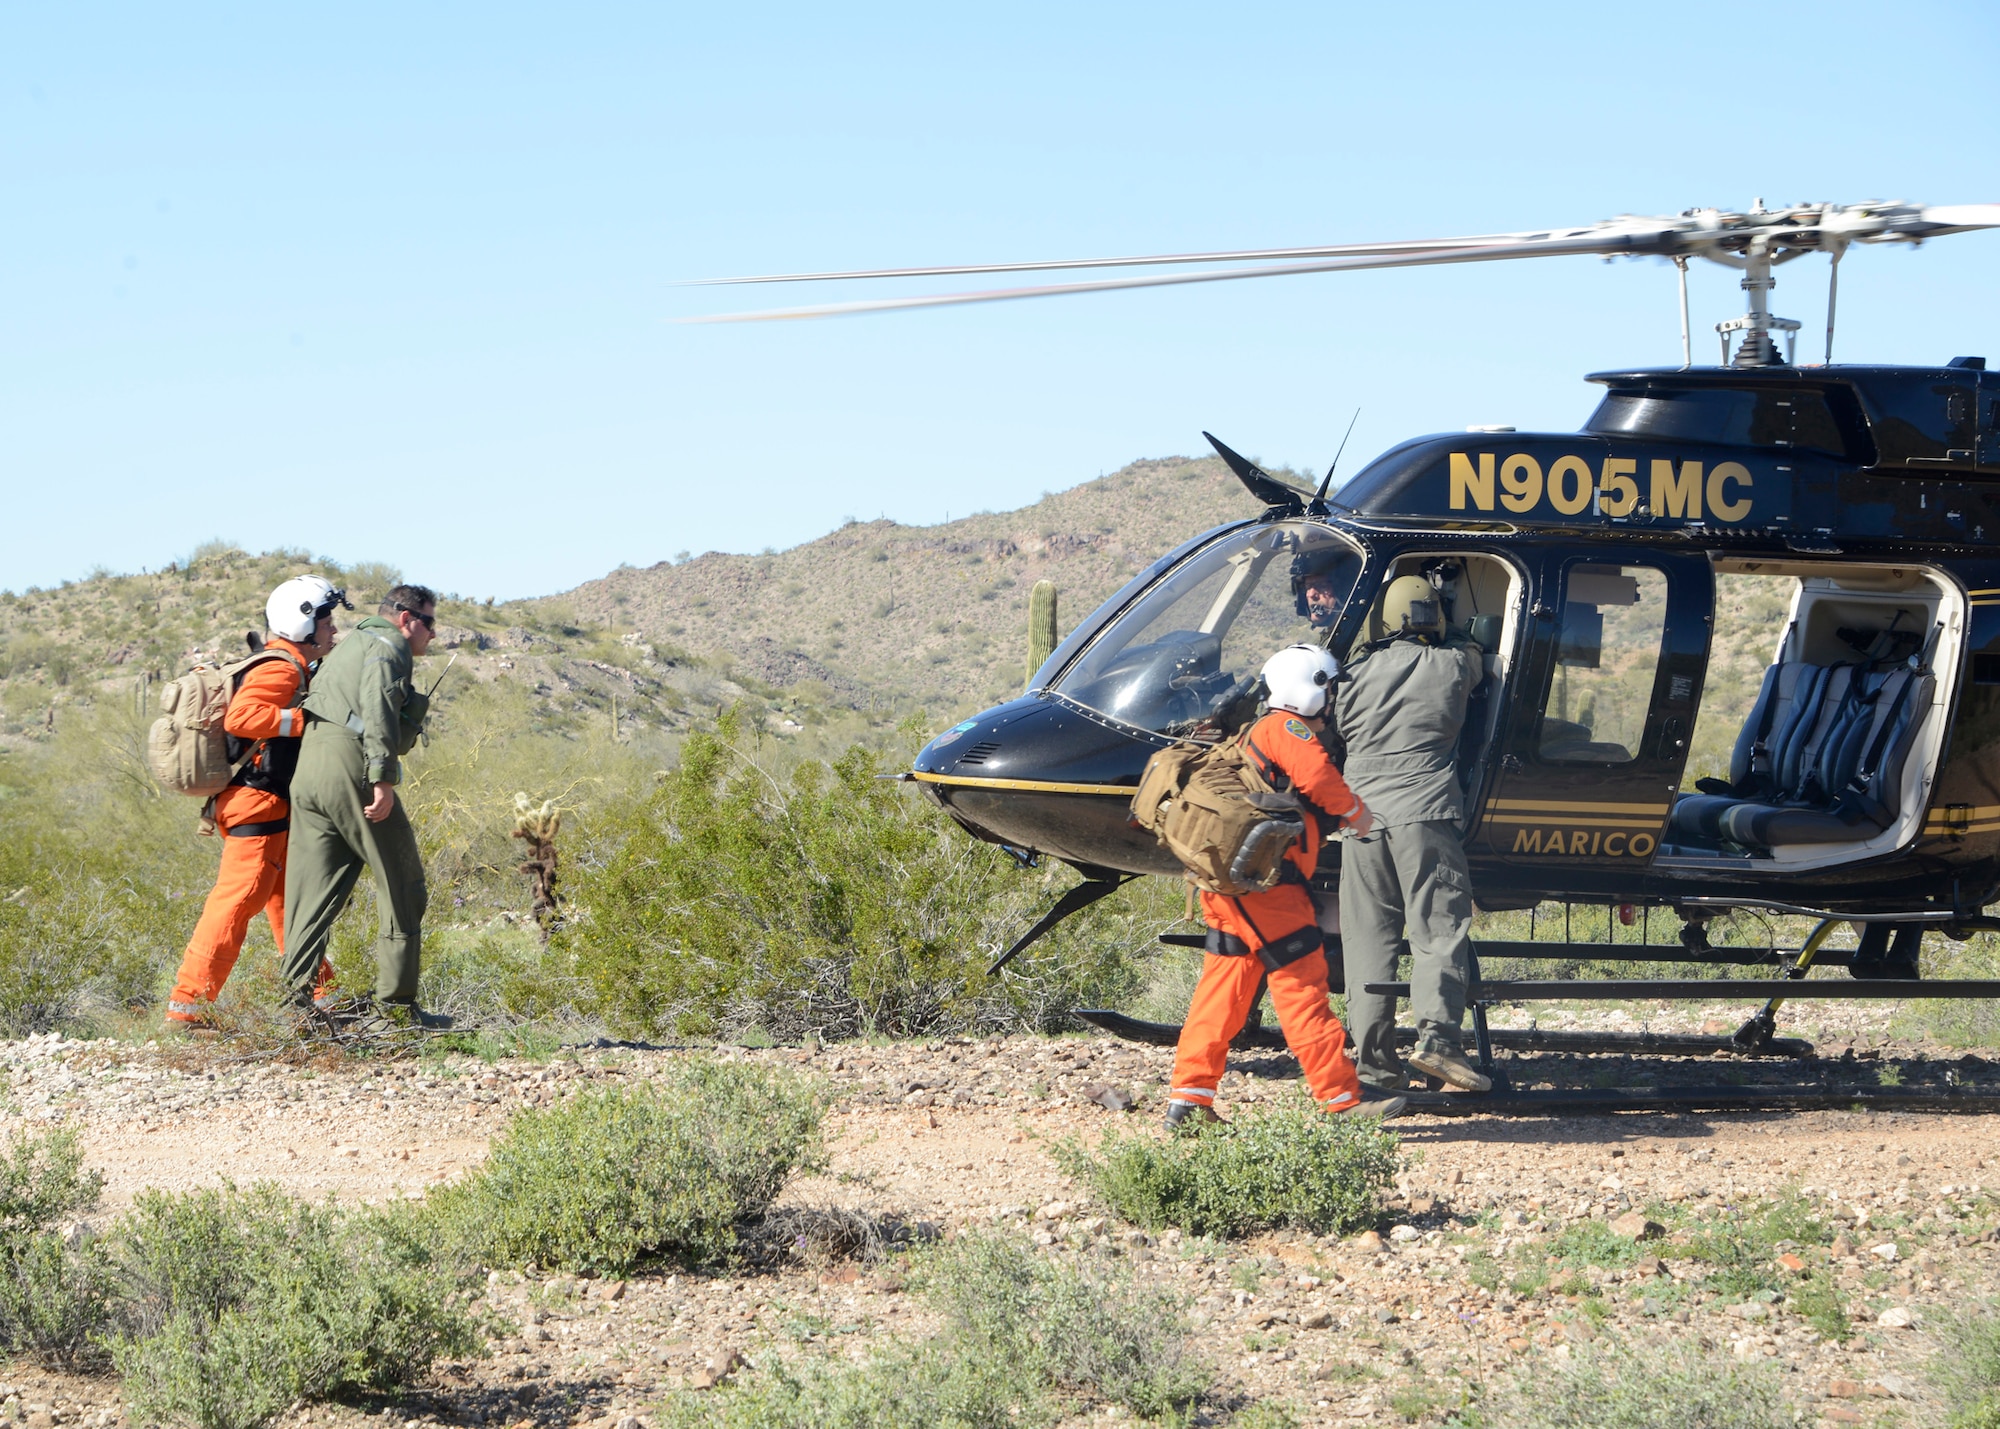 Mariacopa County Search and Rescue team guides Maj. Nicholas Suppa, 56th Operations Support Squadron  assistant director of operations, to the helicopter during a Major Accident Response Exercise at a remote area in Arizona, 1 Mar. 2017. The exercise highlighted the real way Air Force and civilian assets can be used together to more effectively respond to crises, and potentially save lives. (U.S. Air Force photo by Senior Airman Devante Williams)